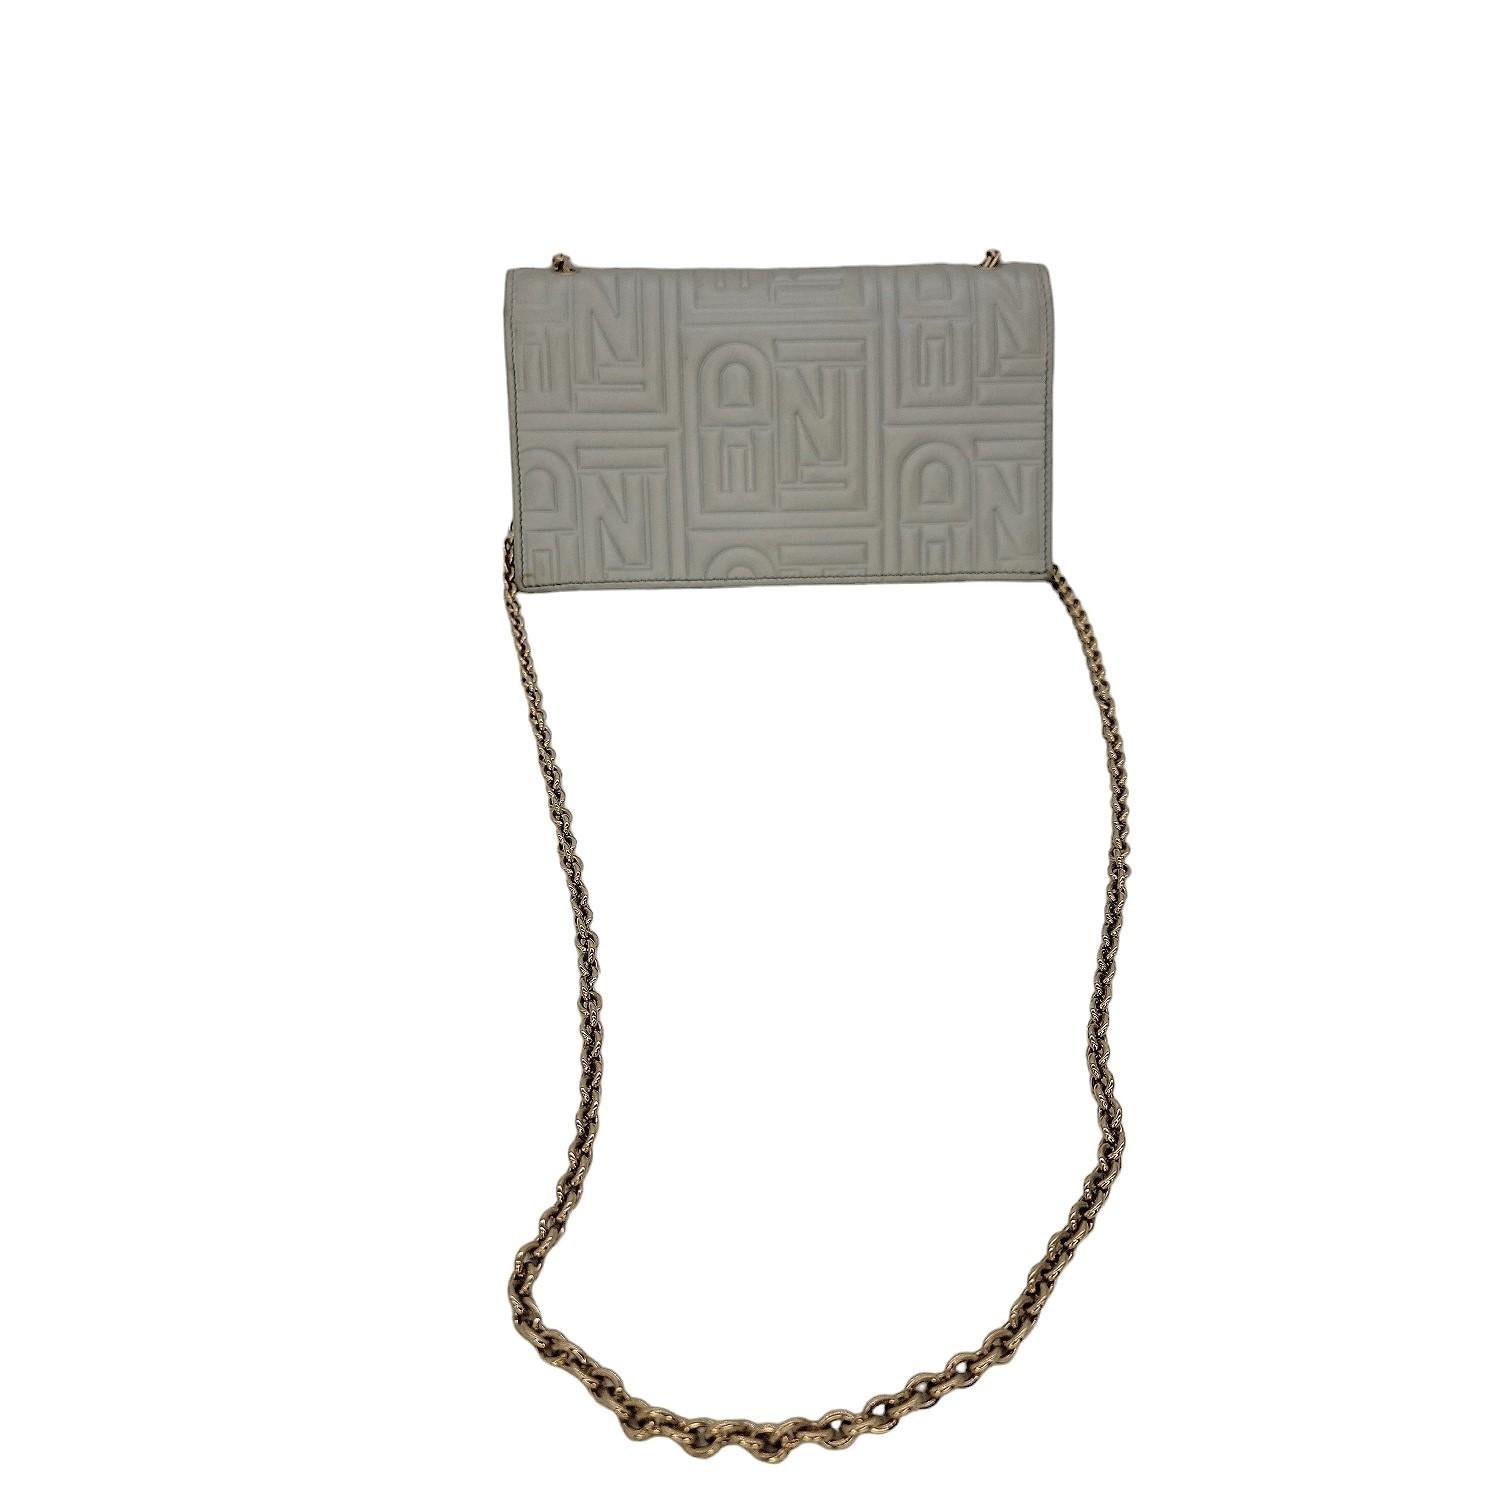 Fendi Metallic Nappa Logo Embossed Long Wallet On Chain in Silver. This chic wallet is crafted of silver embossed leather with the Fendi FF monogram. The bag features a waist-length gold chain link shoulder strap and a frontal flap and light brass